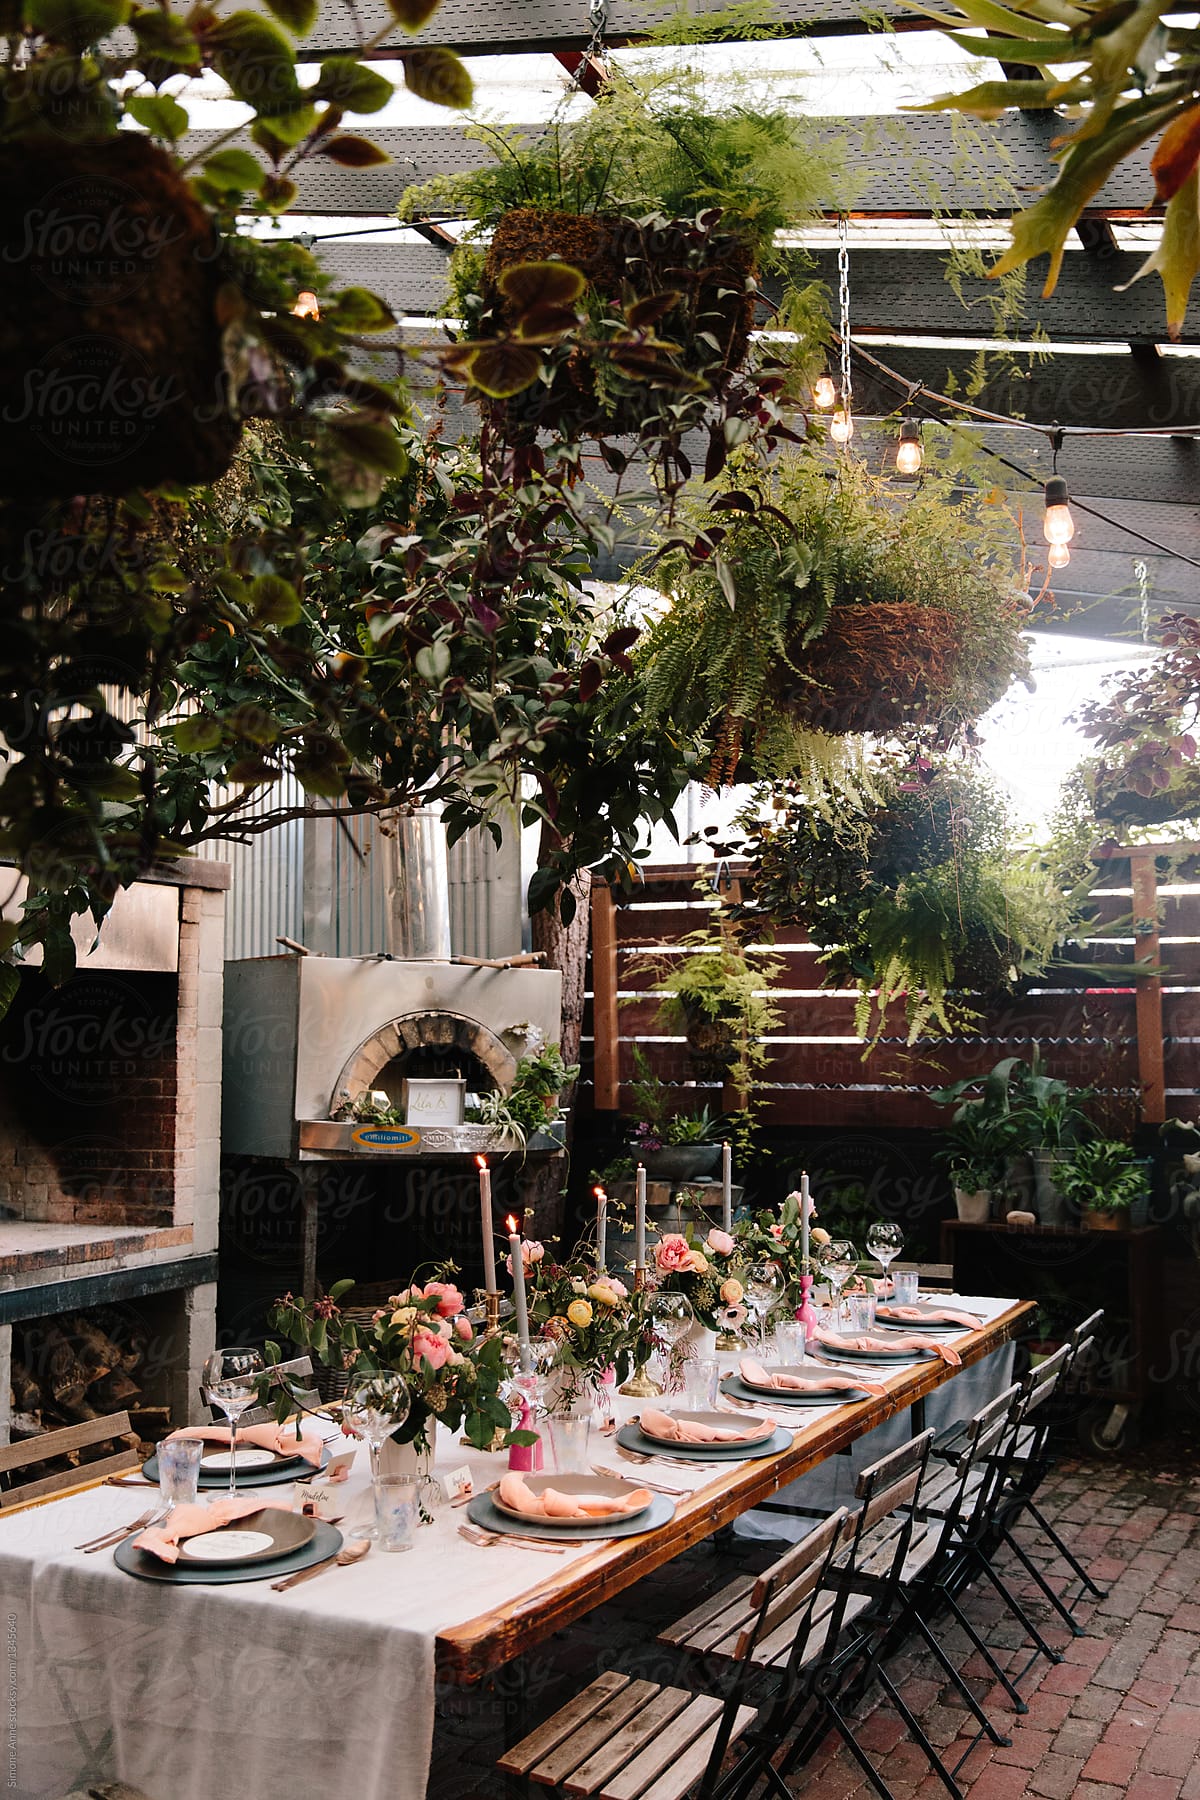 Fancy dinner table set up for a dinner party in a greenhouse